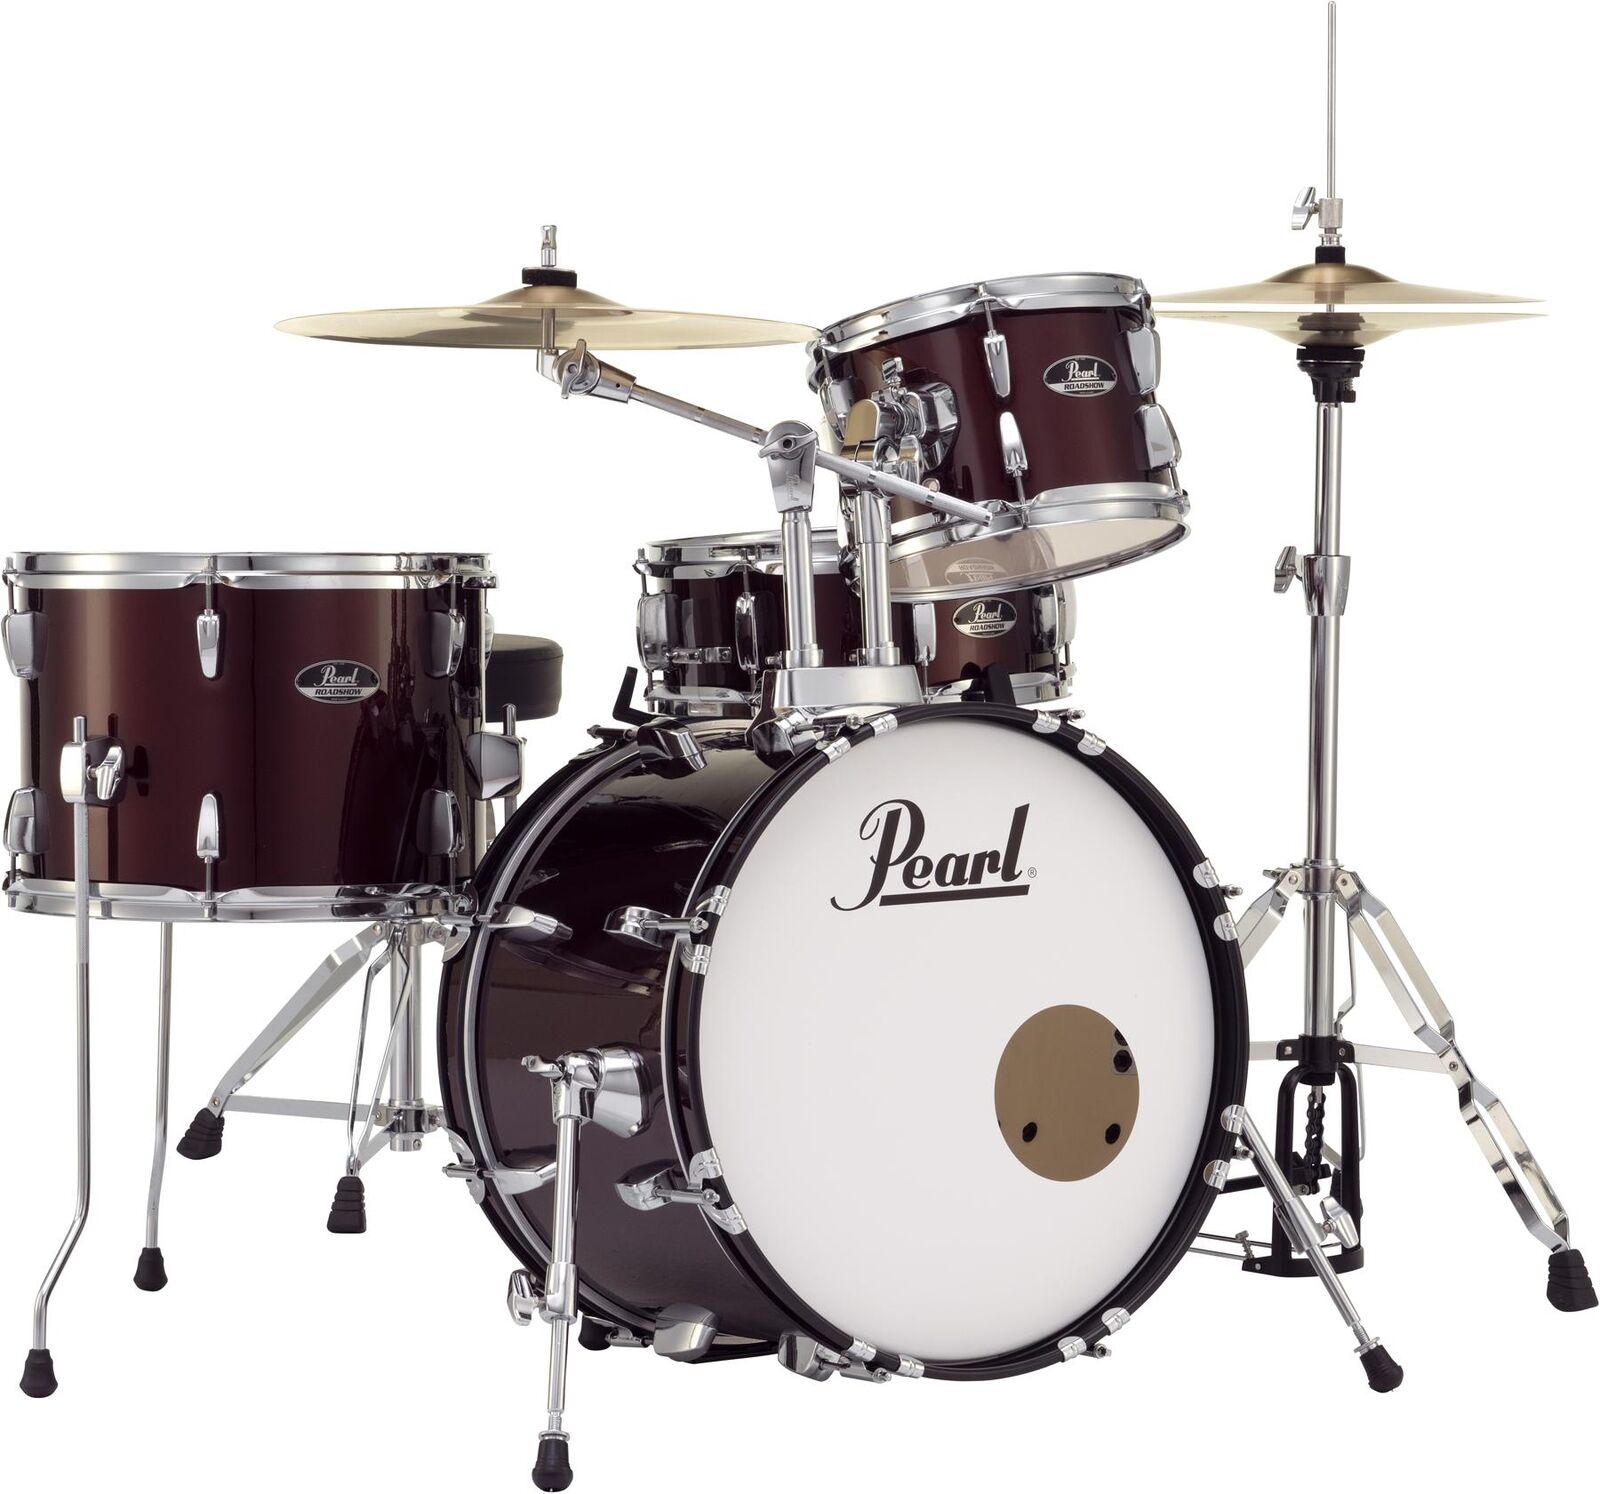 Pearl Roadshow 4-piece Complete Drum Set with Cymbals – Wine Red 1